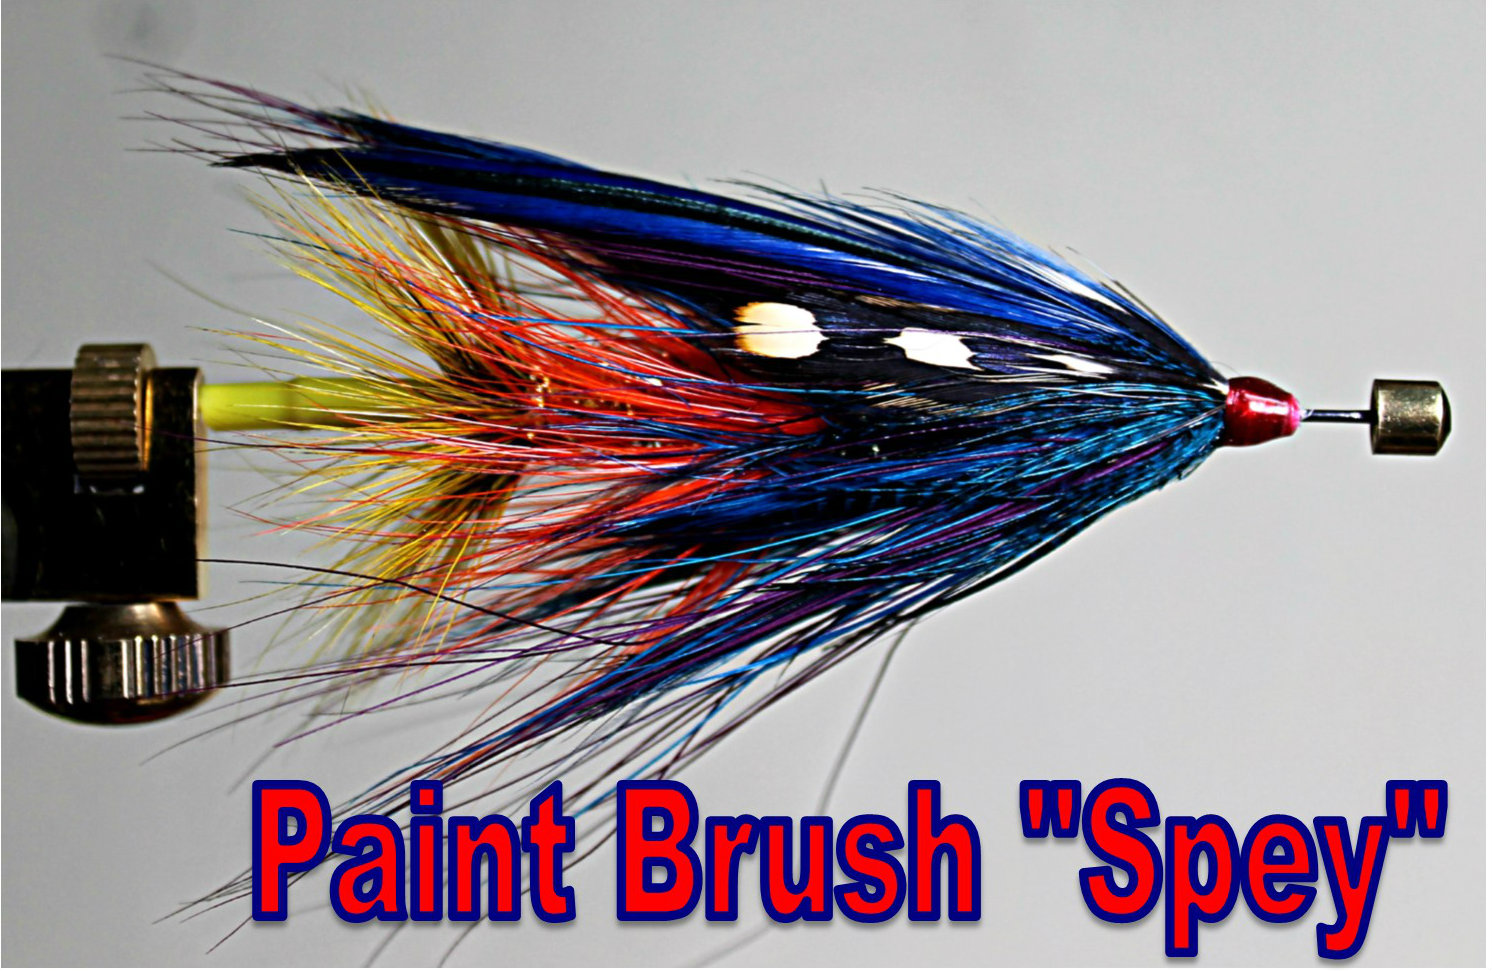 Tying Tube Flies - Full Pattern Videos - The Canadian Tube Fly Company